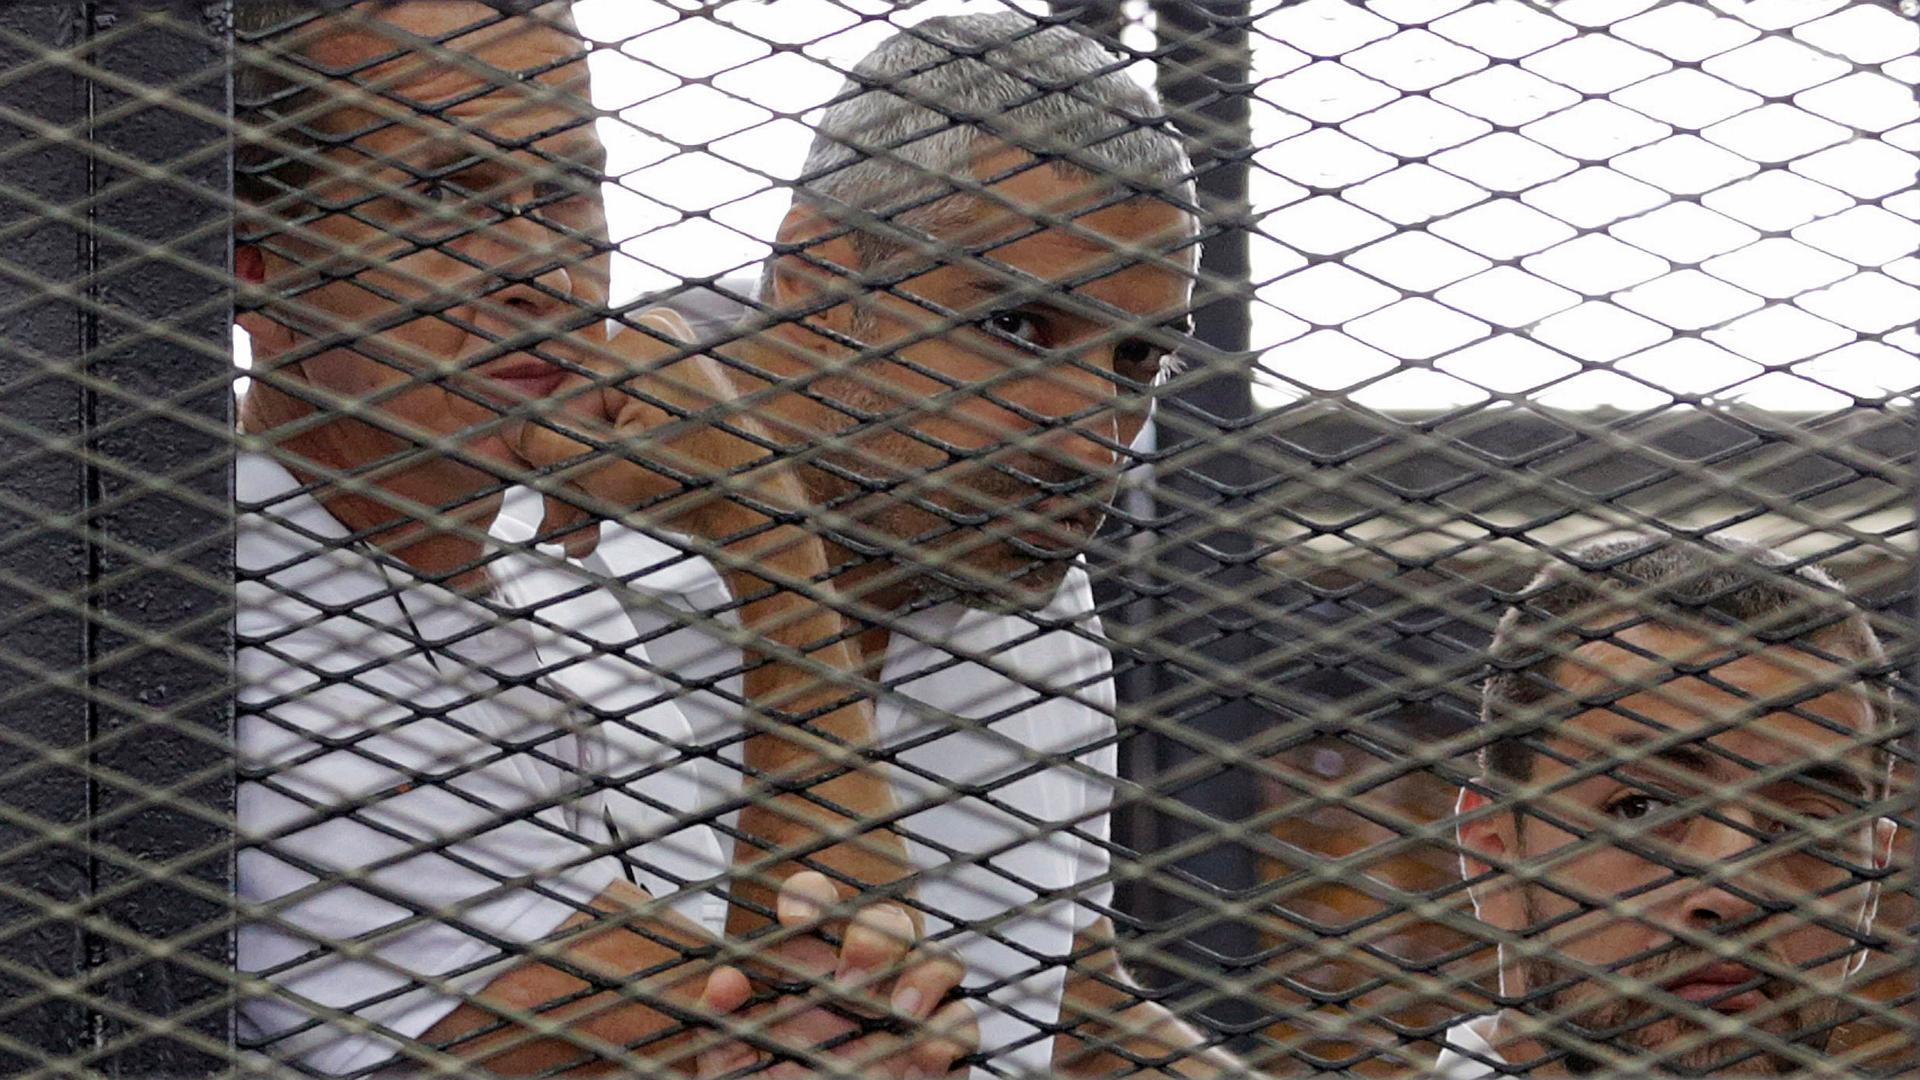 Al Jazeera journalists (L-R) Peter Greste, Mohammed Fahmy and Baher Mohamed stand behind bars at a court in Cairo last summer.